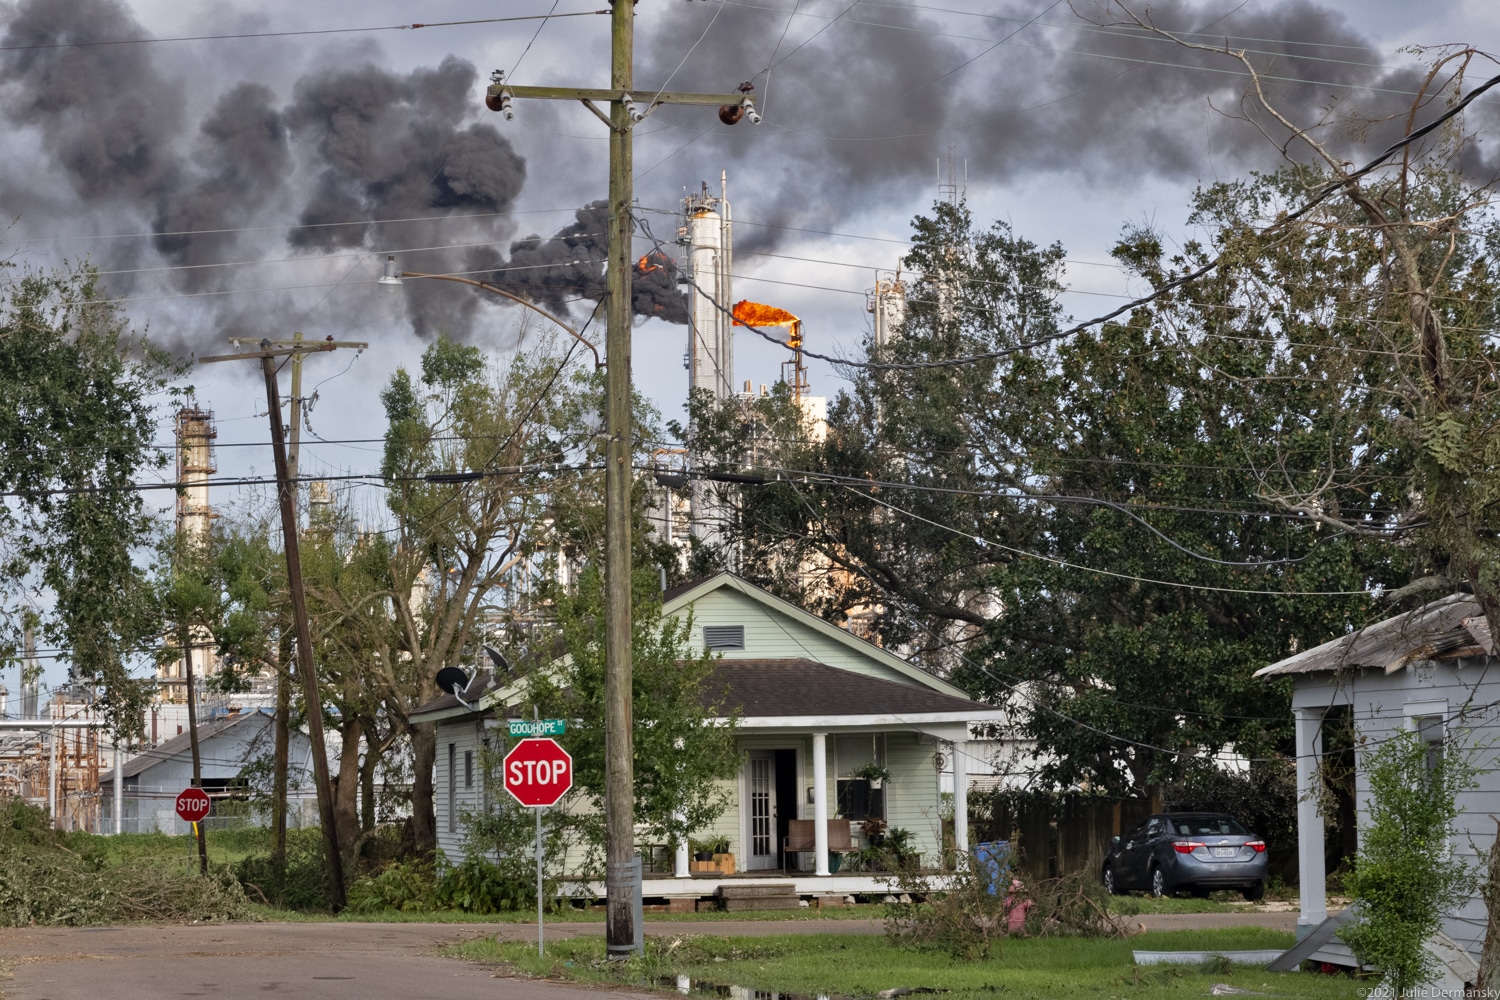 Green house with trees and black smoke coming from a burning refinery flare